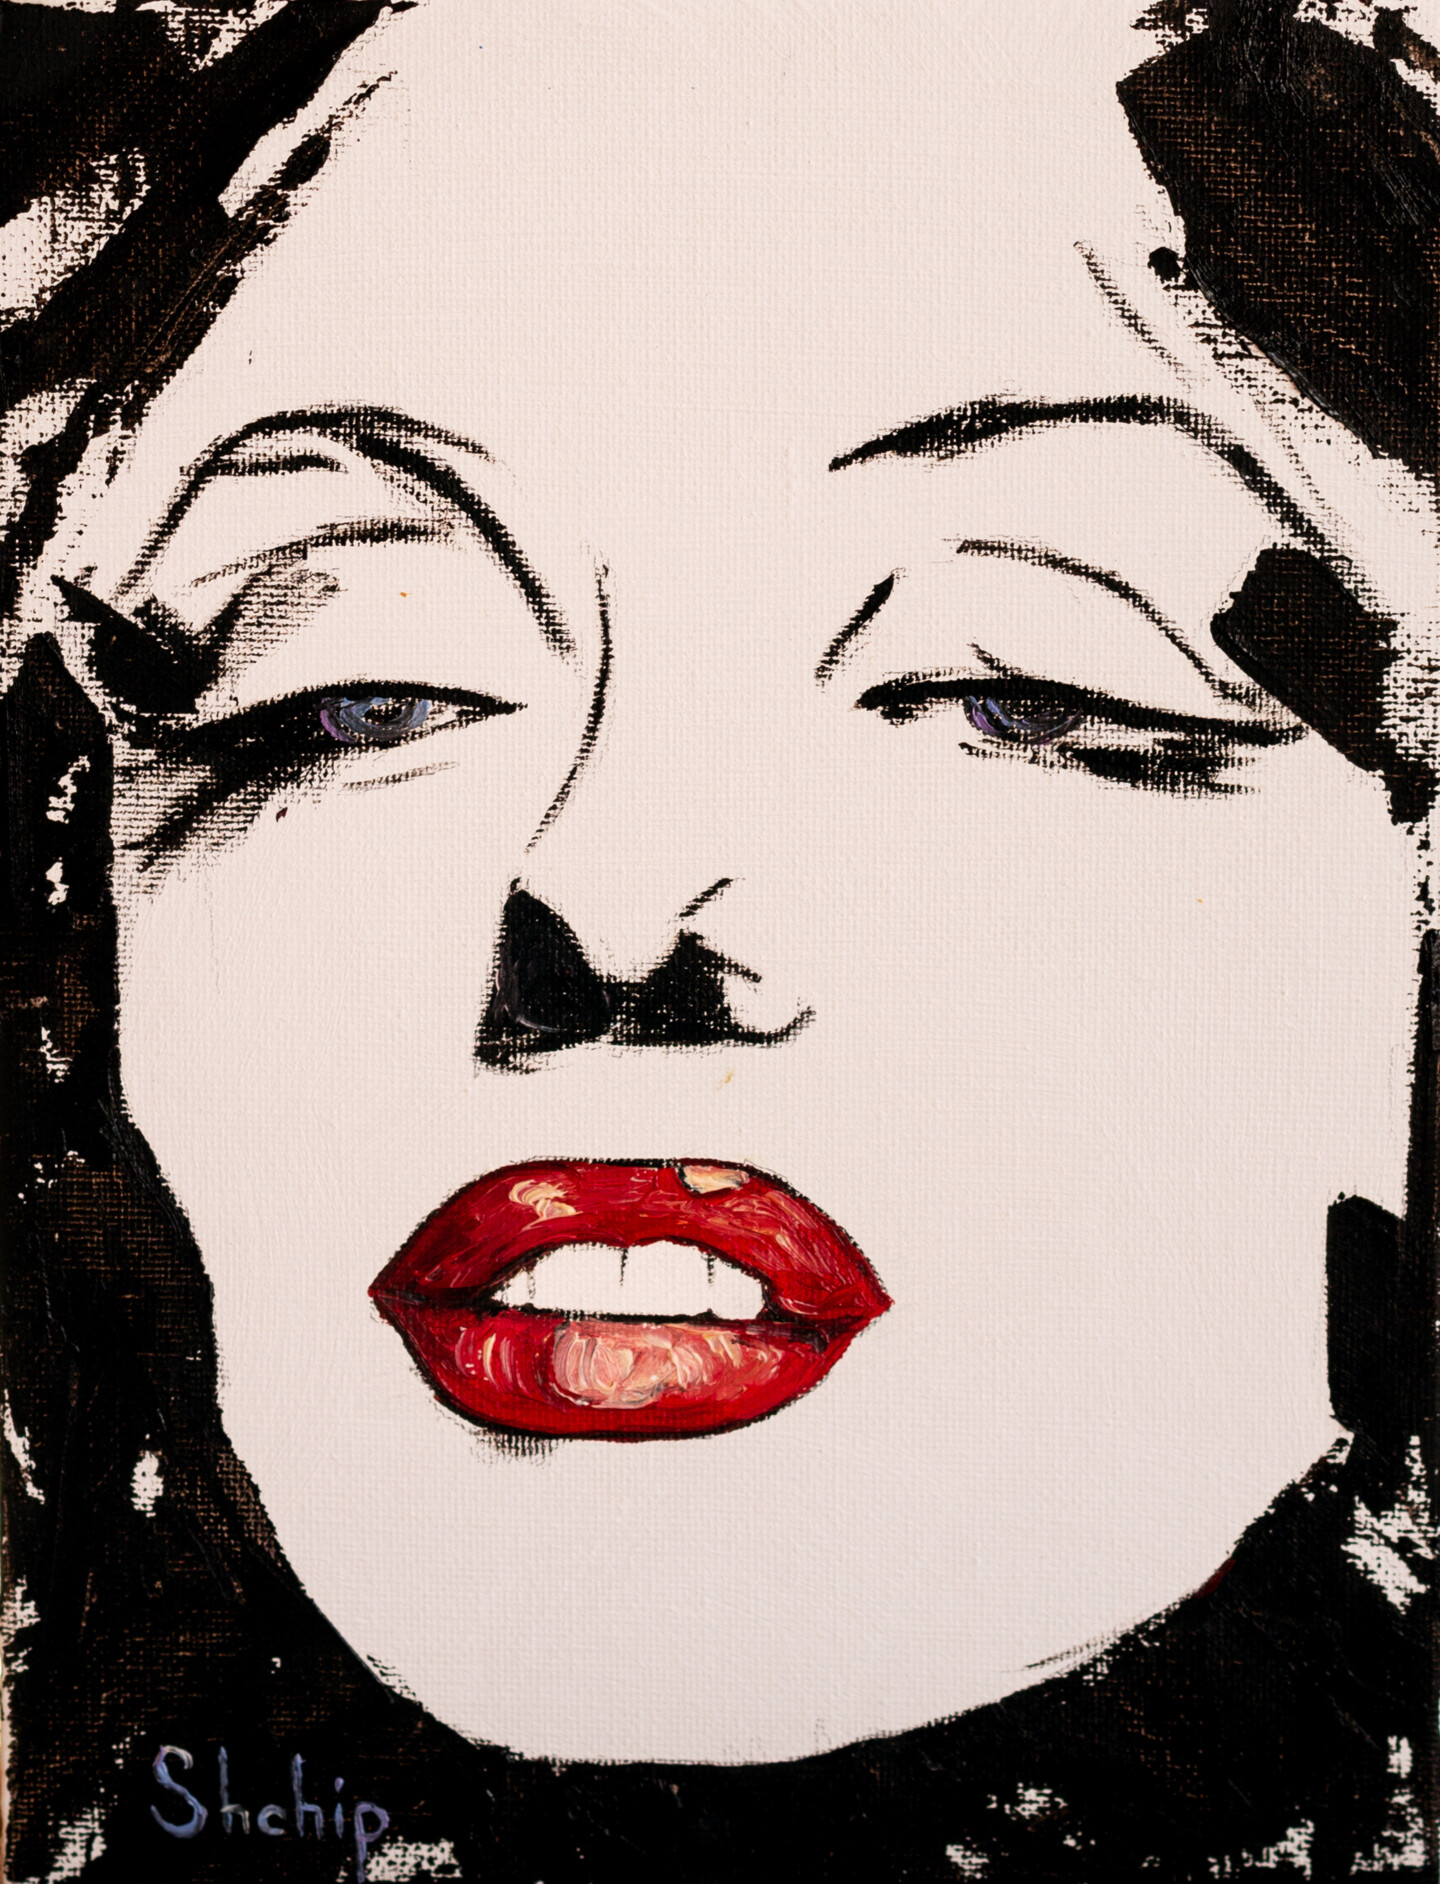 marilyn monroe poster black and white with red lips